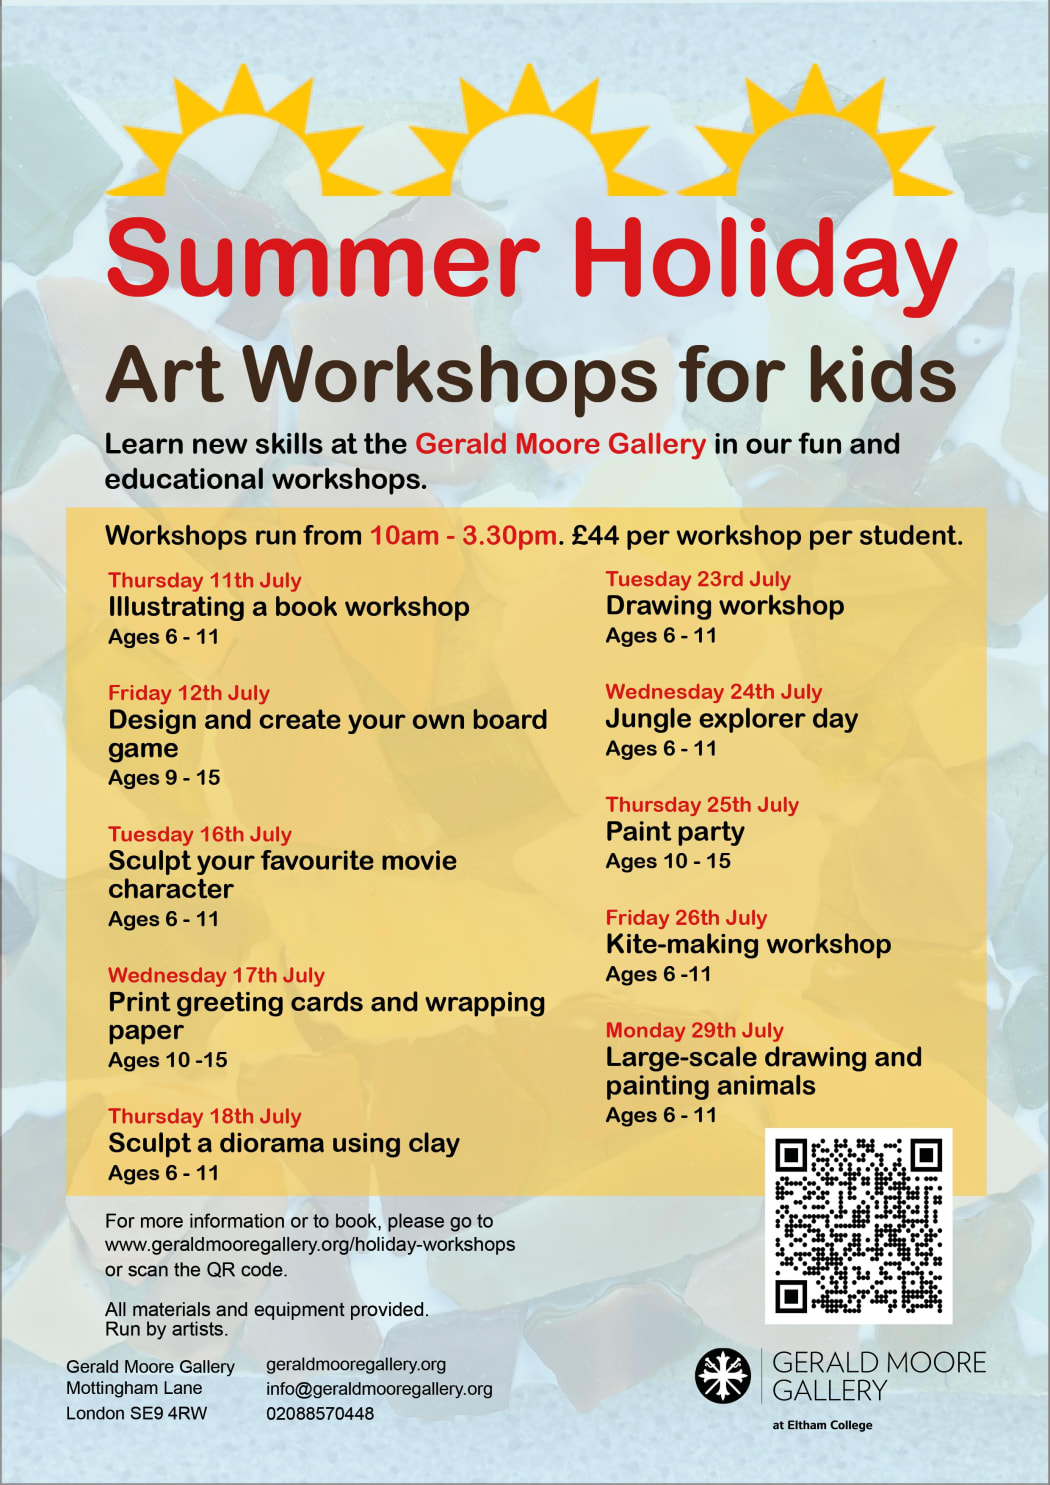 Summer Art Workshops for Kids at the Gerald Moore Gallery